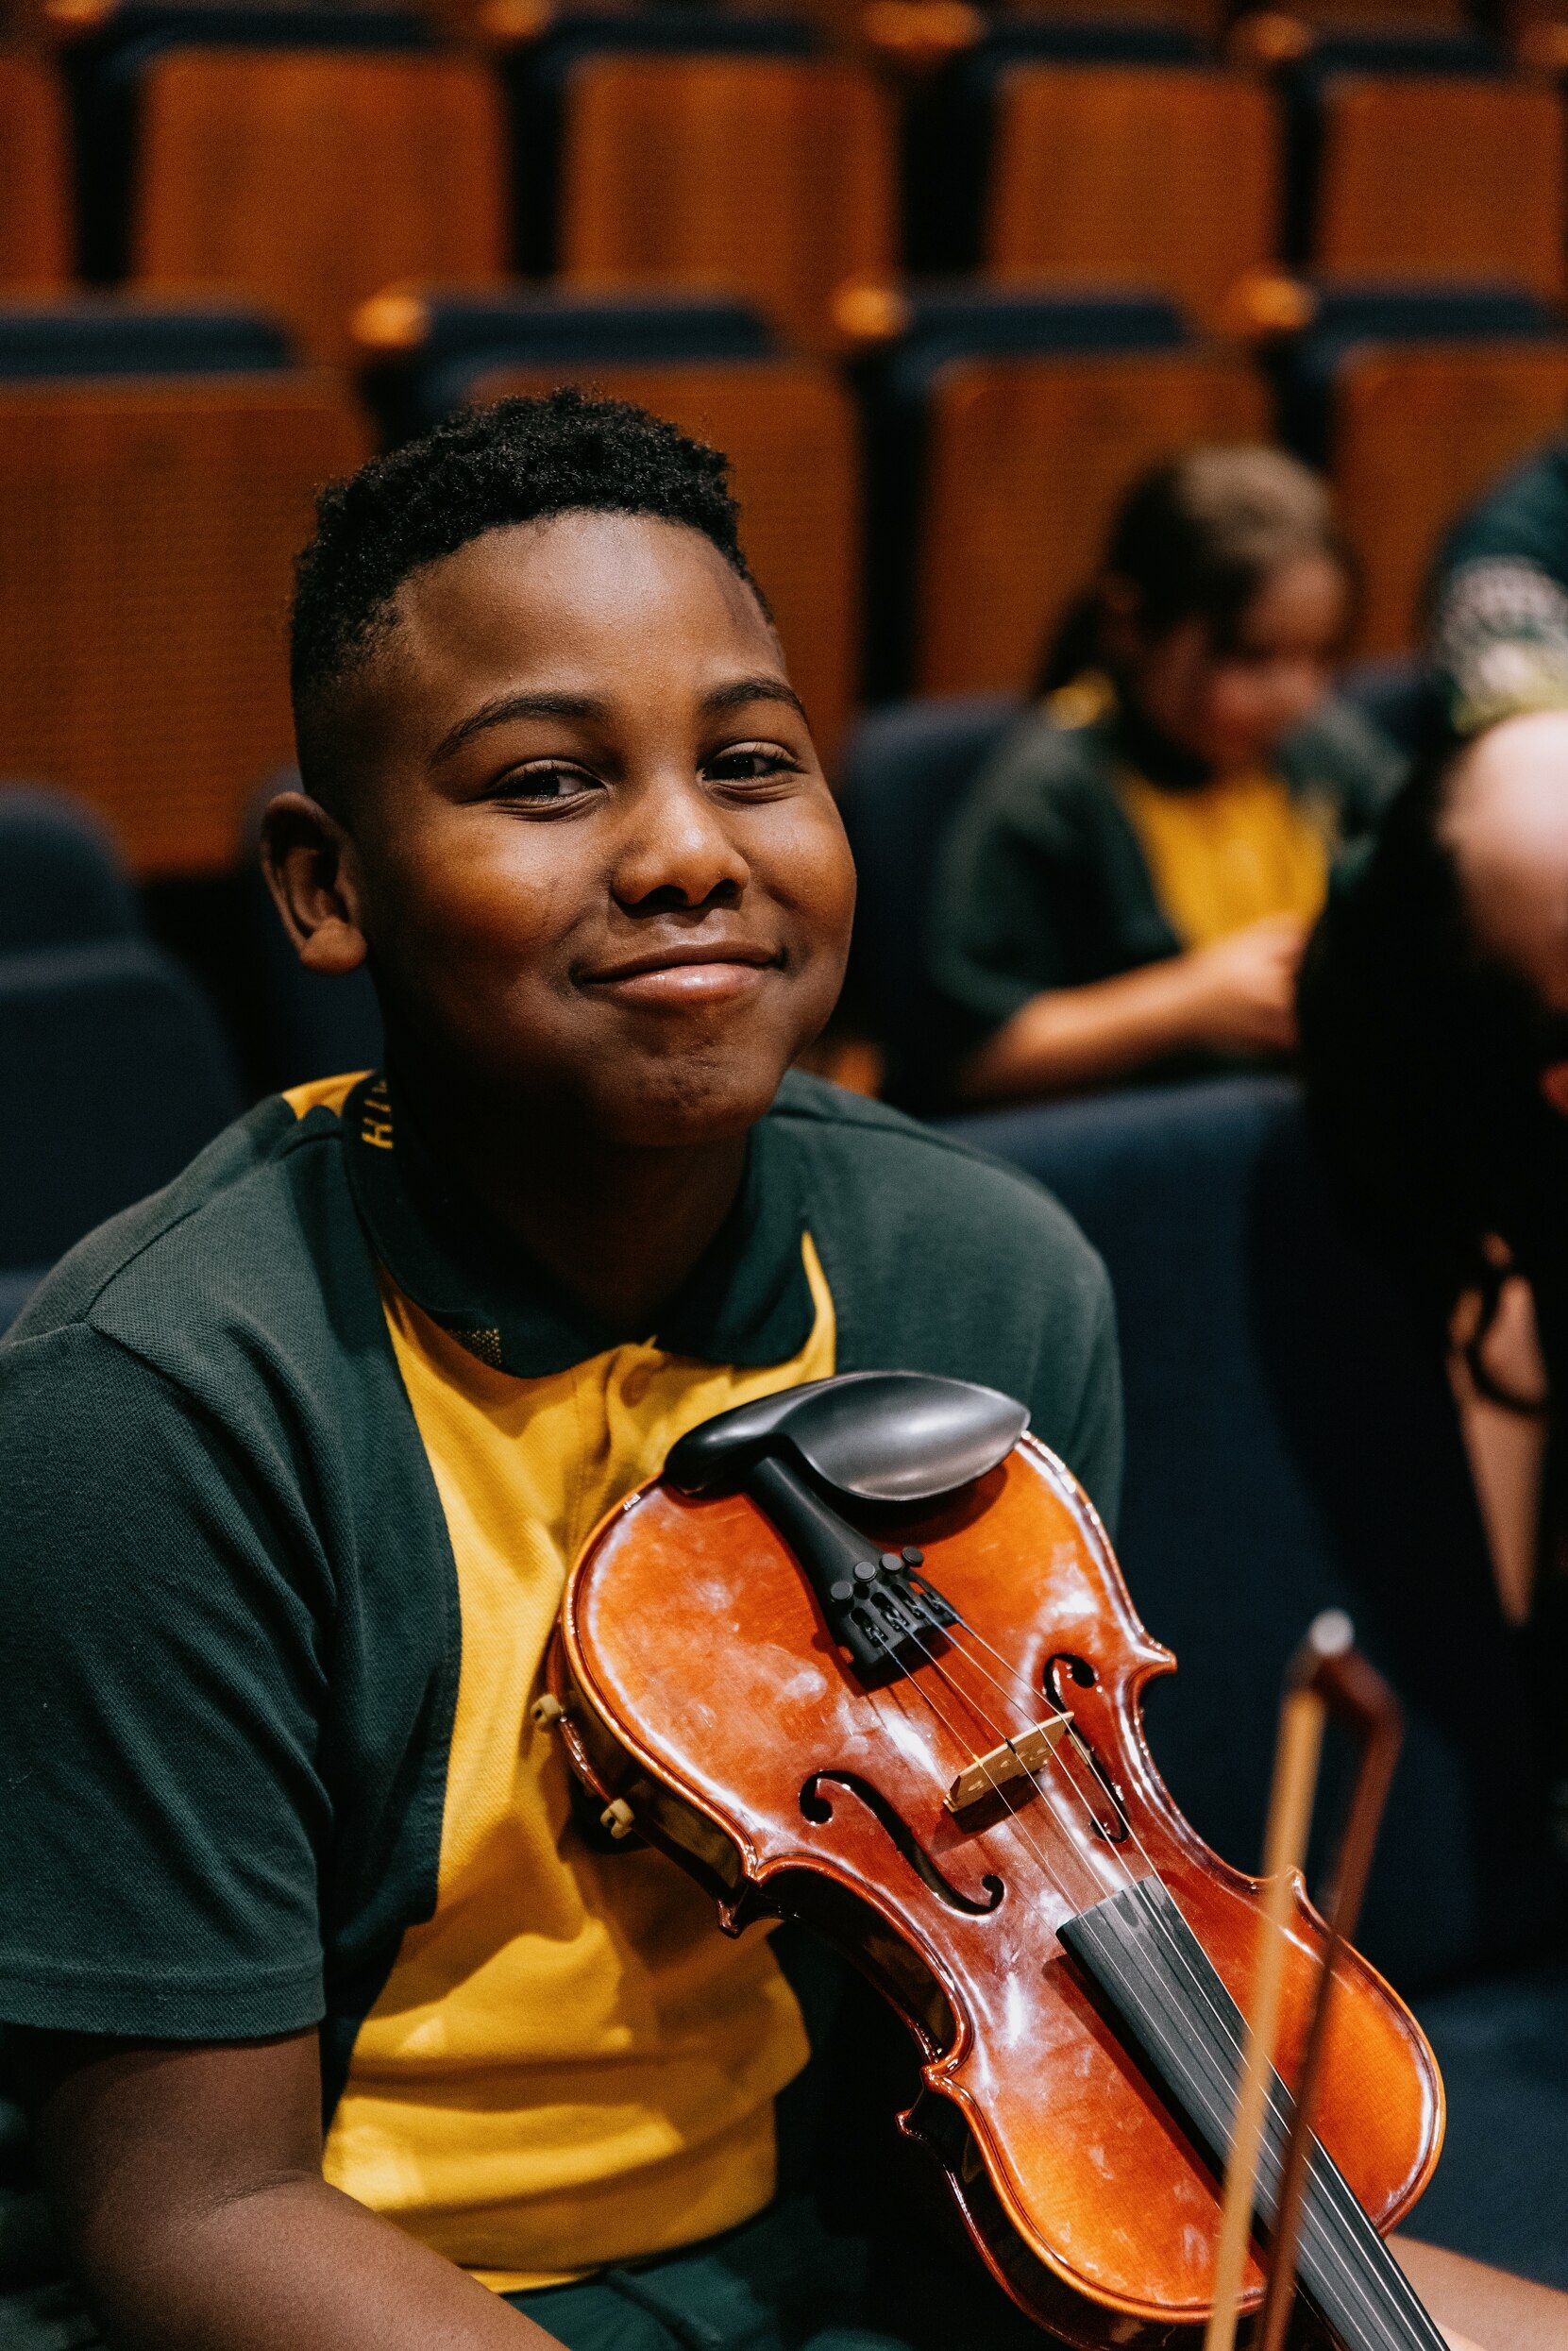 A primary-aged Black boy in a yellow and green school uniform smiles sweetly while holding a violin in an auditorium.